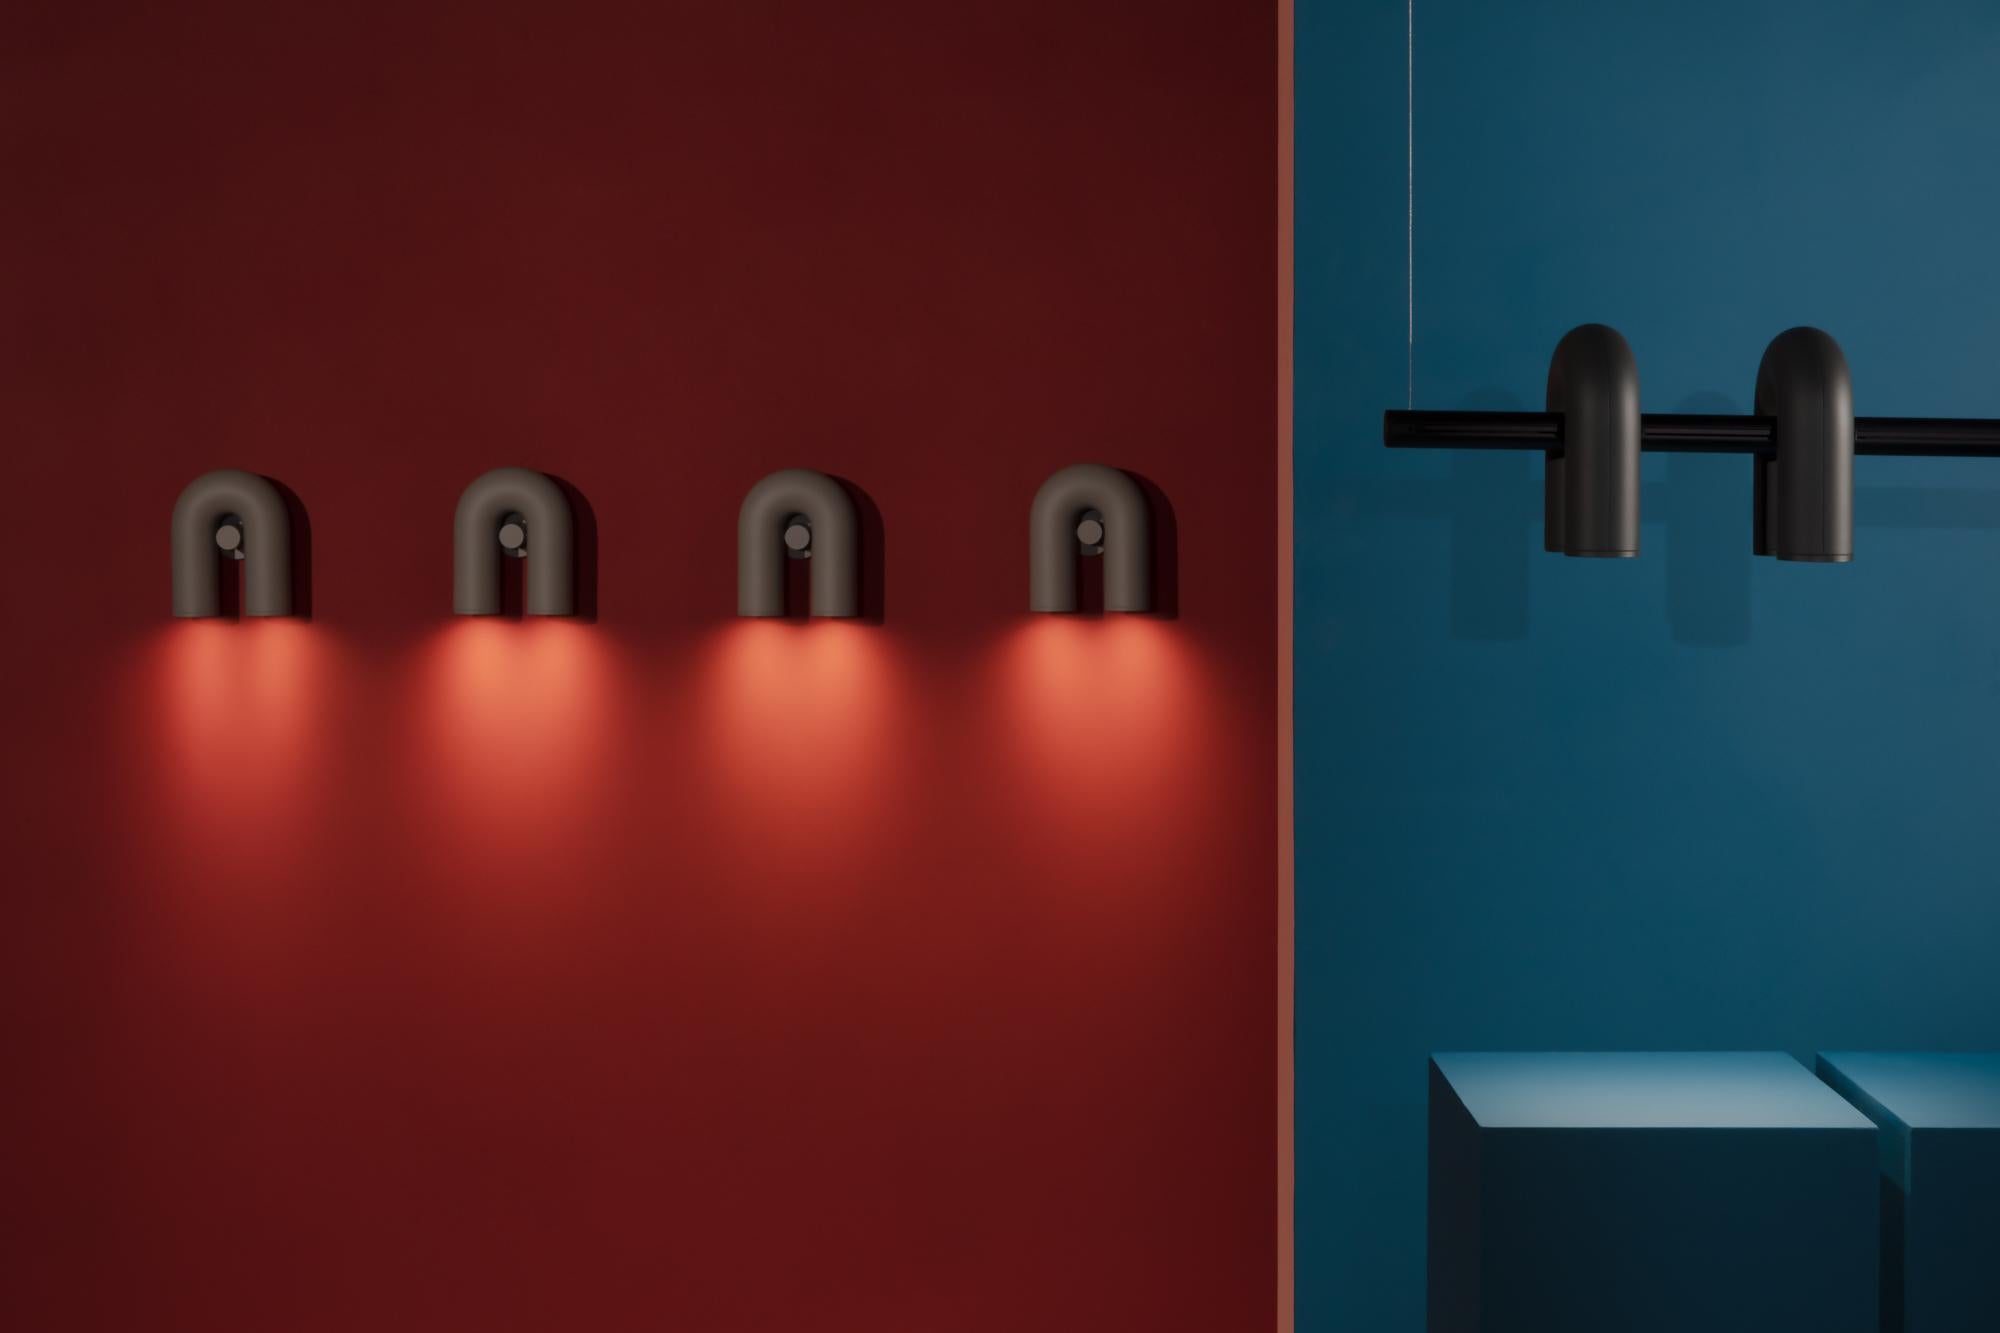 Cirkus wall lamps by AGO Lighting
Coated ABS, aluminum

UL Listed
LED GU10 110-240V (not included)

Four colors available: Charcoal, grey, green, terracotta
Dimensions: 18 x 14.8 x 7.8 cm


AGO is a Korean design studio specialized in lighting. AGO